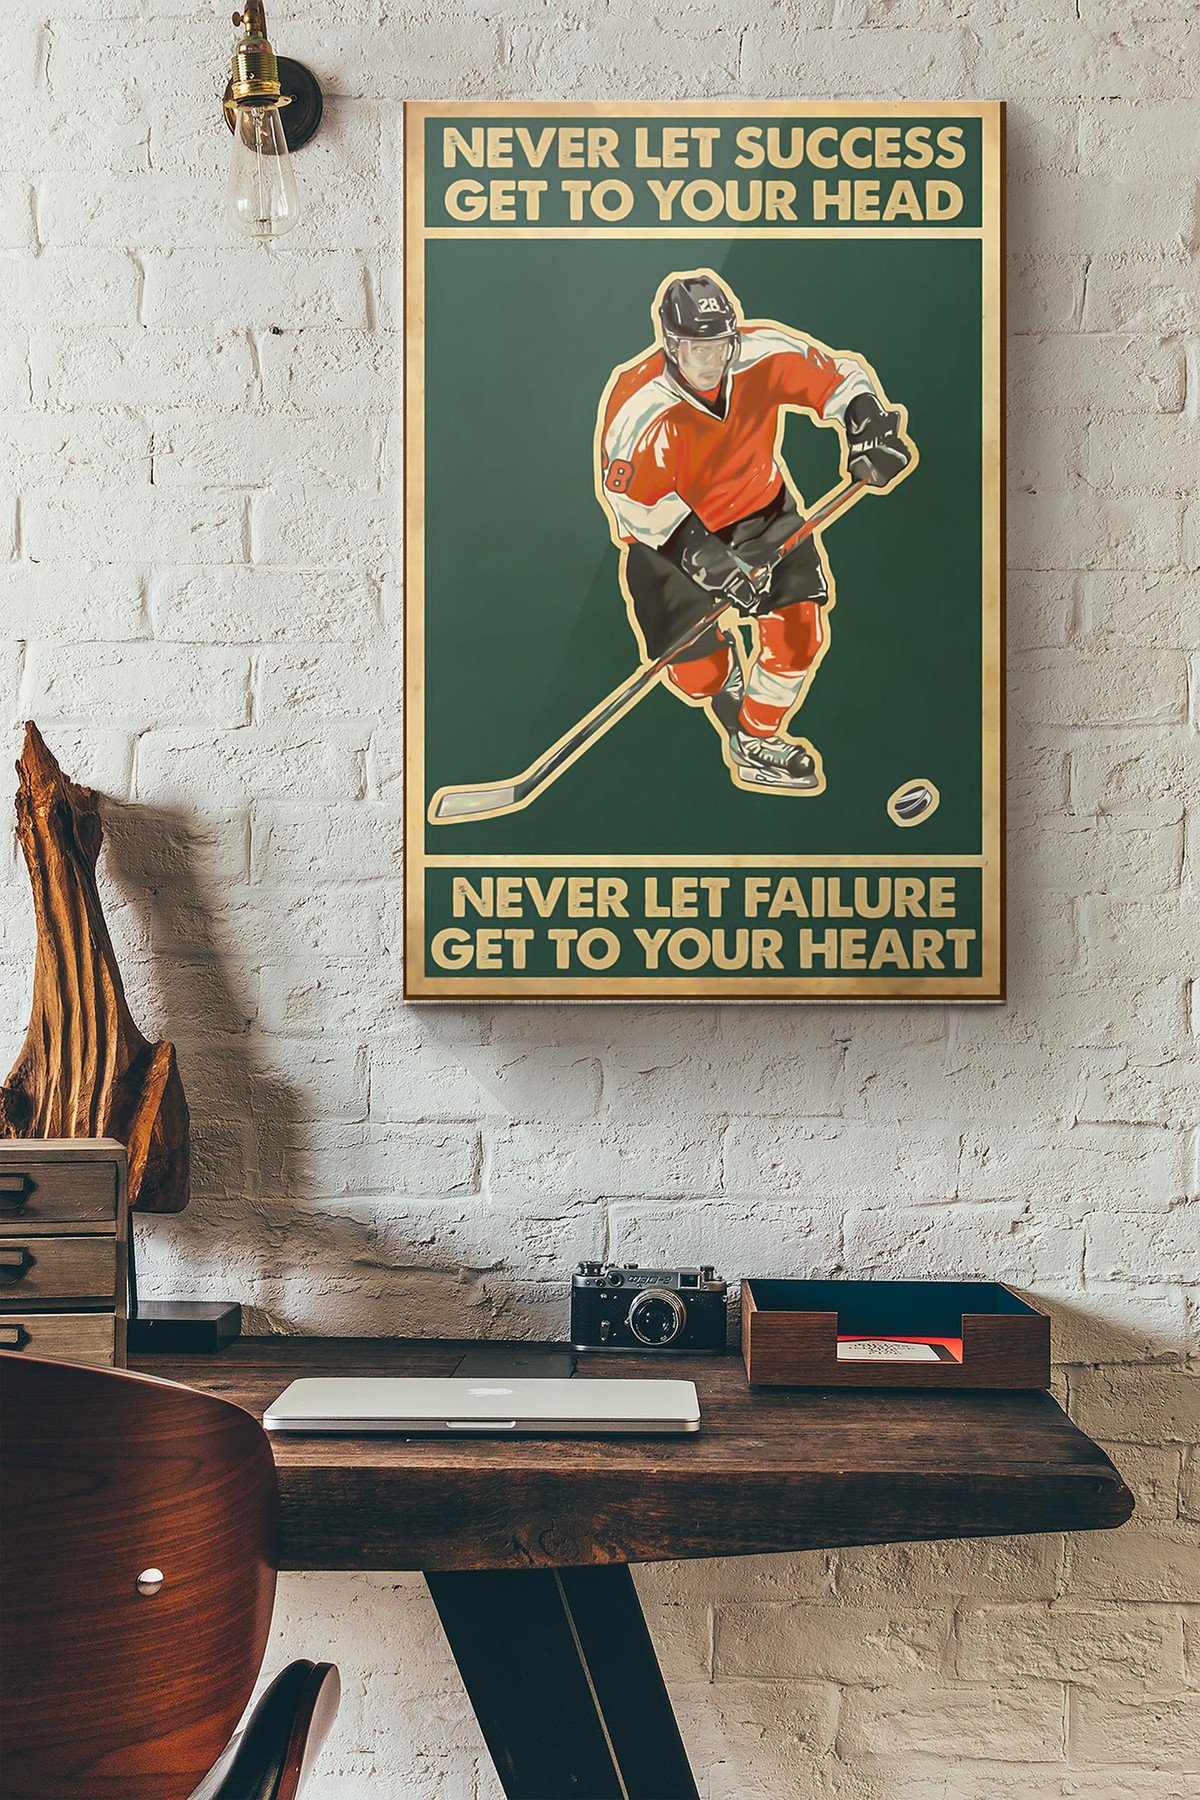 Hockey Never Let Success Get To Your Head Canvas Painting Ideas, Canvas Hanging Prints, Gift Idea Framed Prints, Canvas Paintings Wrapped Canvas 8x10